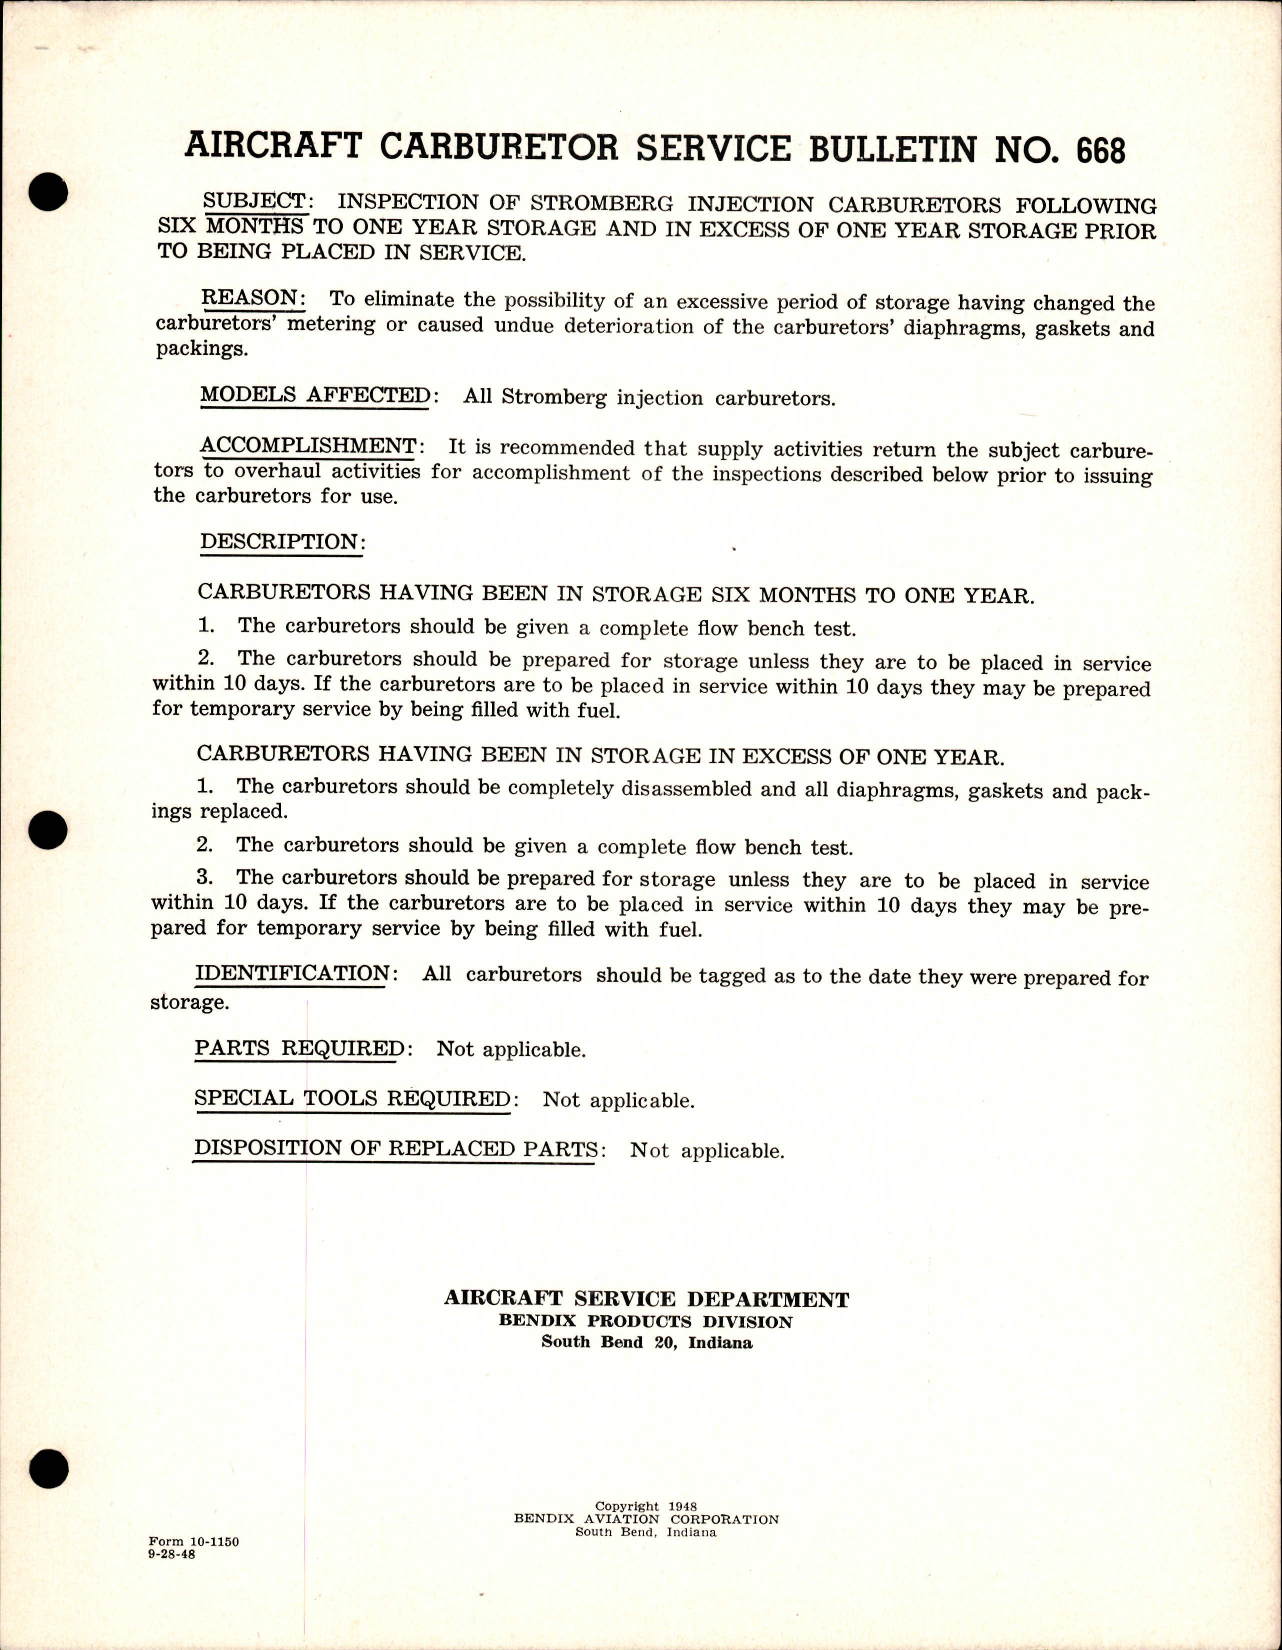 Sample page 1 from AirCorps Library document: Inspection of Stromberg Injection Carburetors Following Six Months to One Year Storage and in Excess of One Year Storage Prior to Being Placed in Service